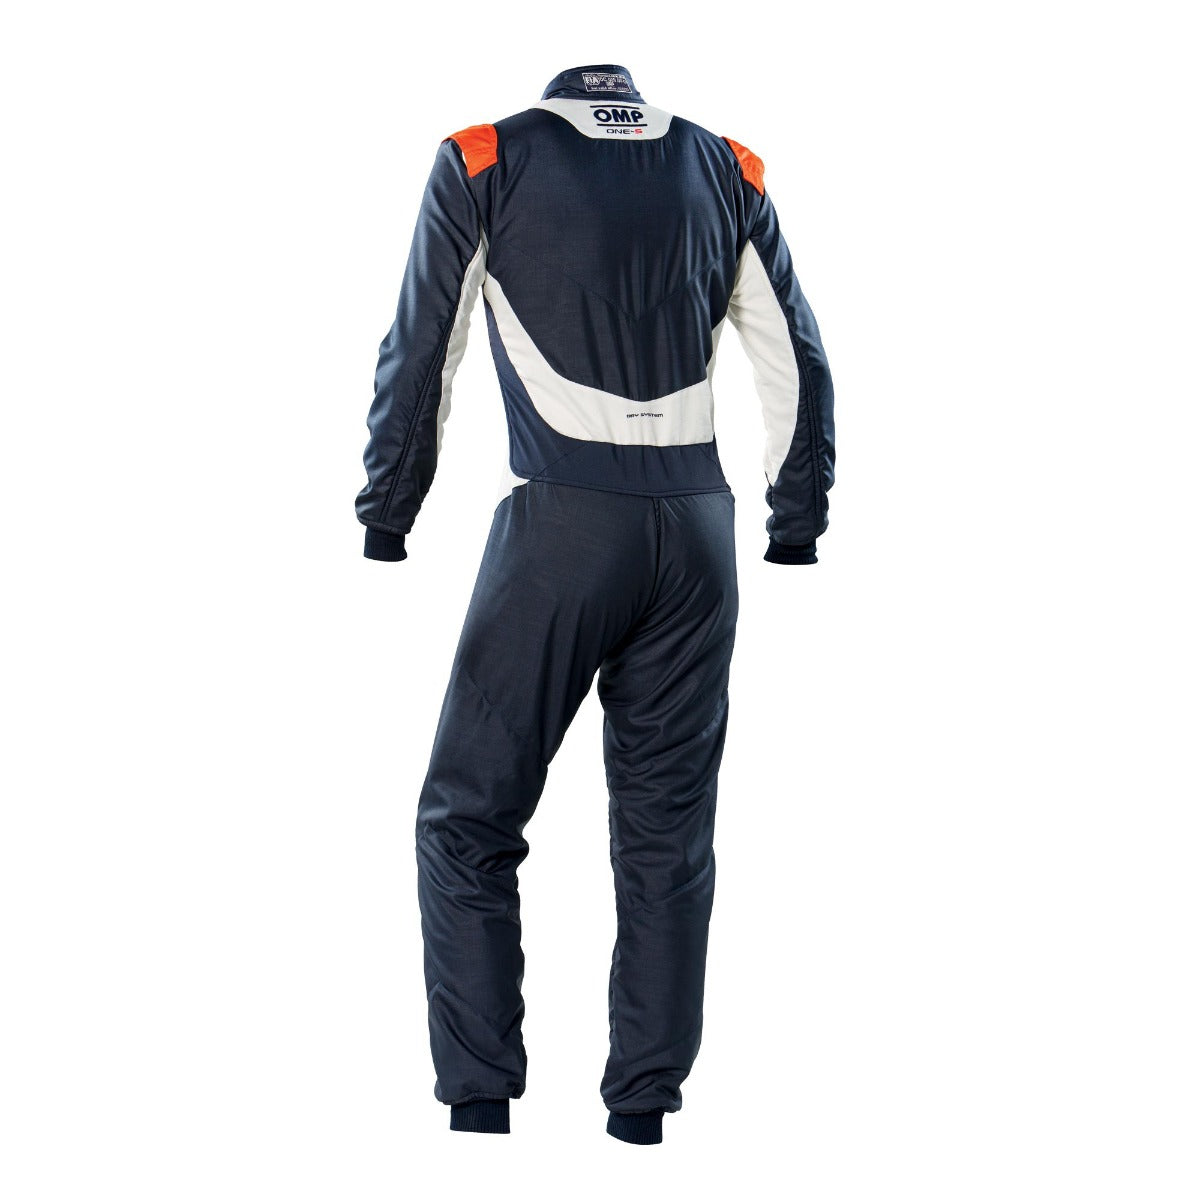 OMP ONE-S Racing Fire Suit Blue Back Image CLEARANCE SALE Lowest Price and biggest discount